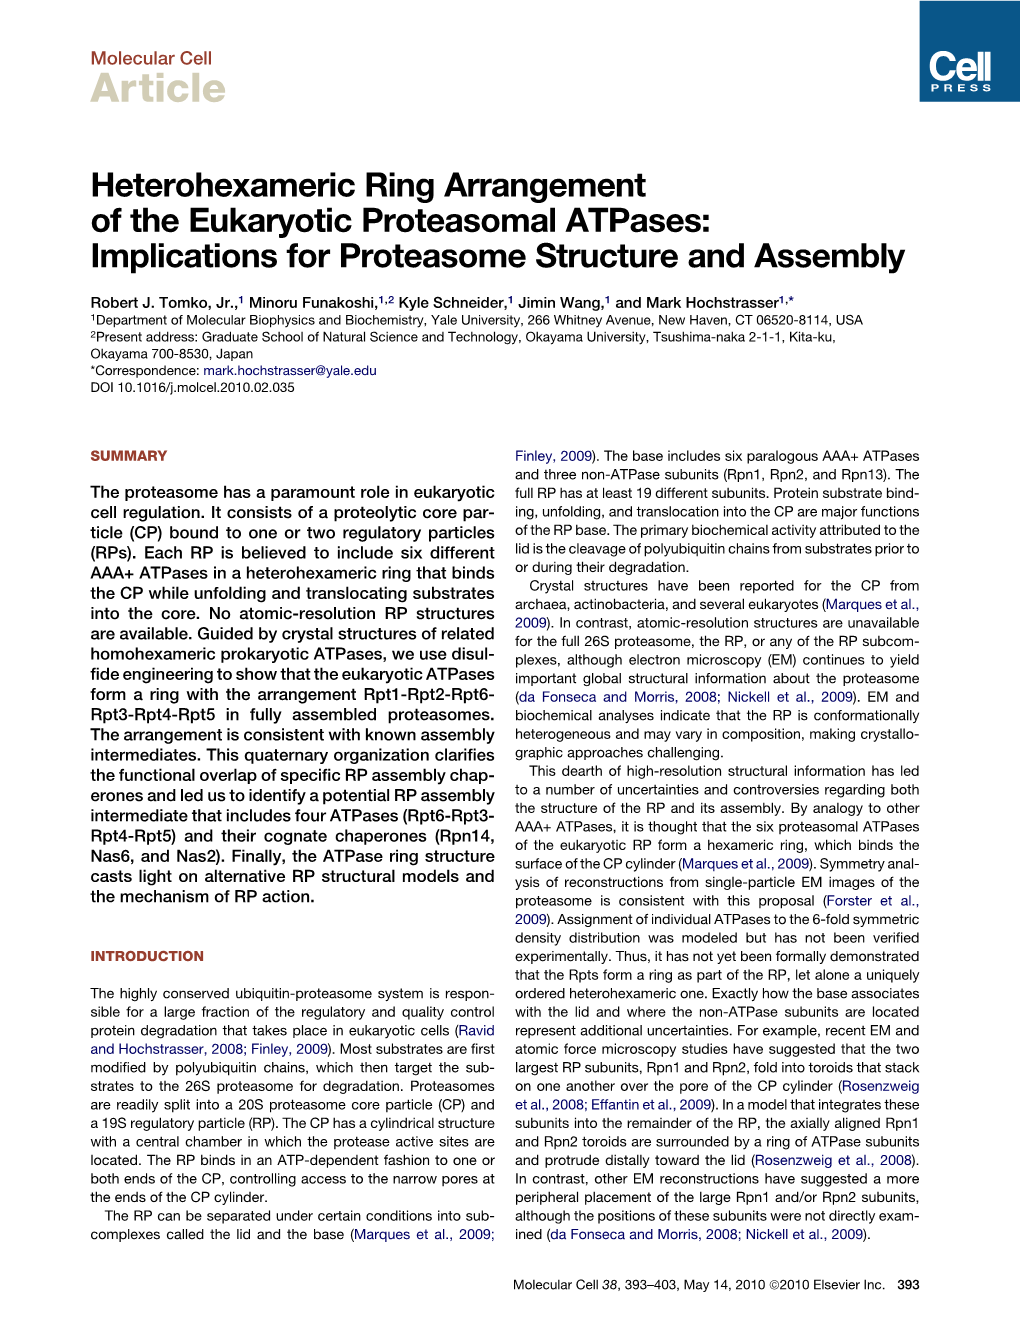 Heterohexameric Ring Arrangement of the Eukaryotic Proteasomal Atpases: Implications for Proteasome Structure and Assembly